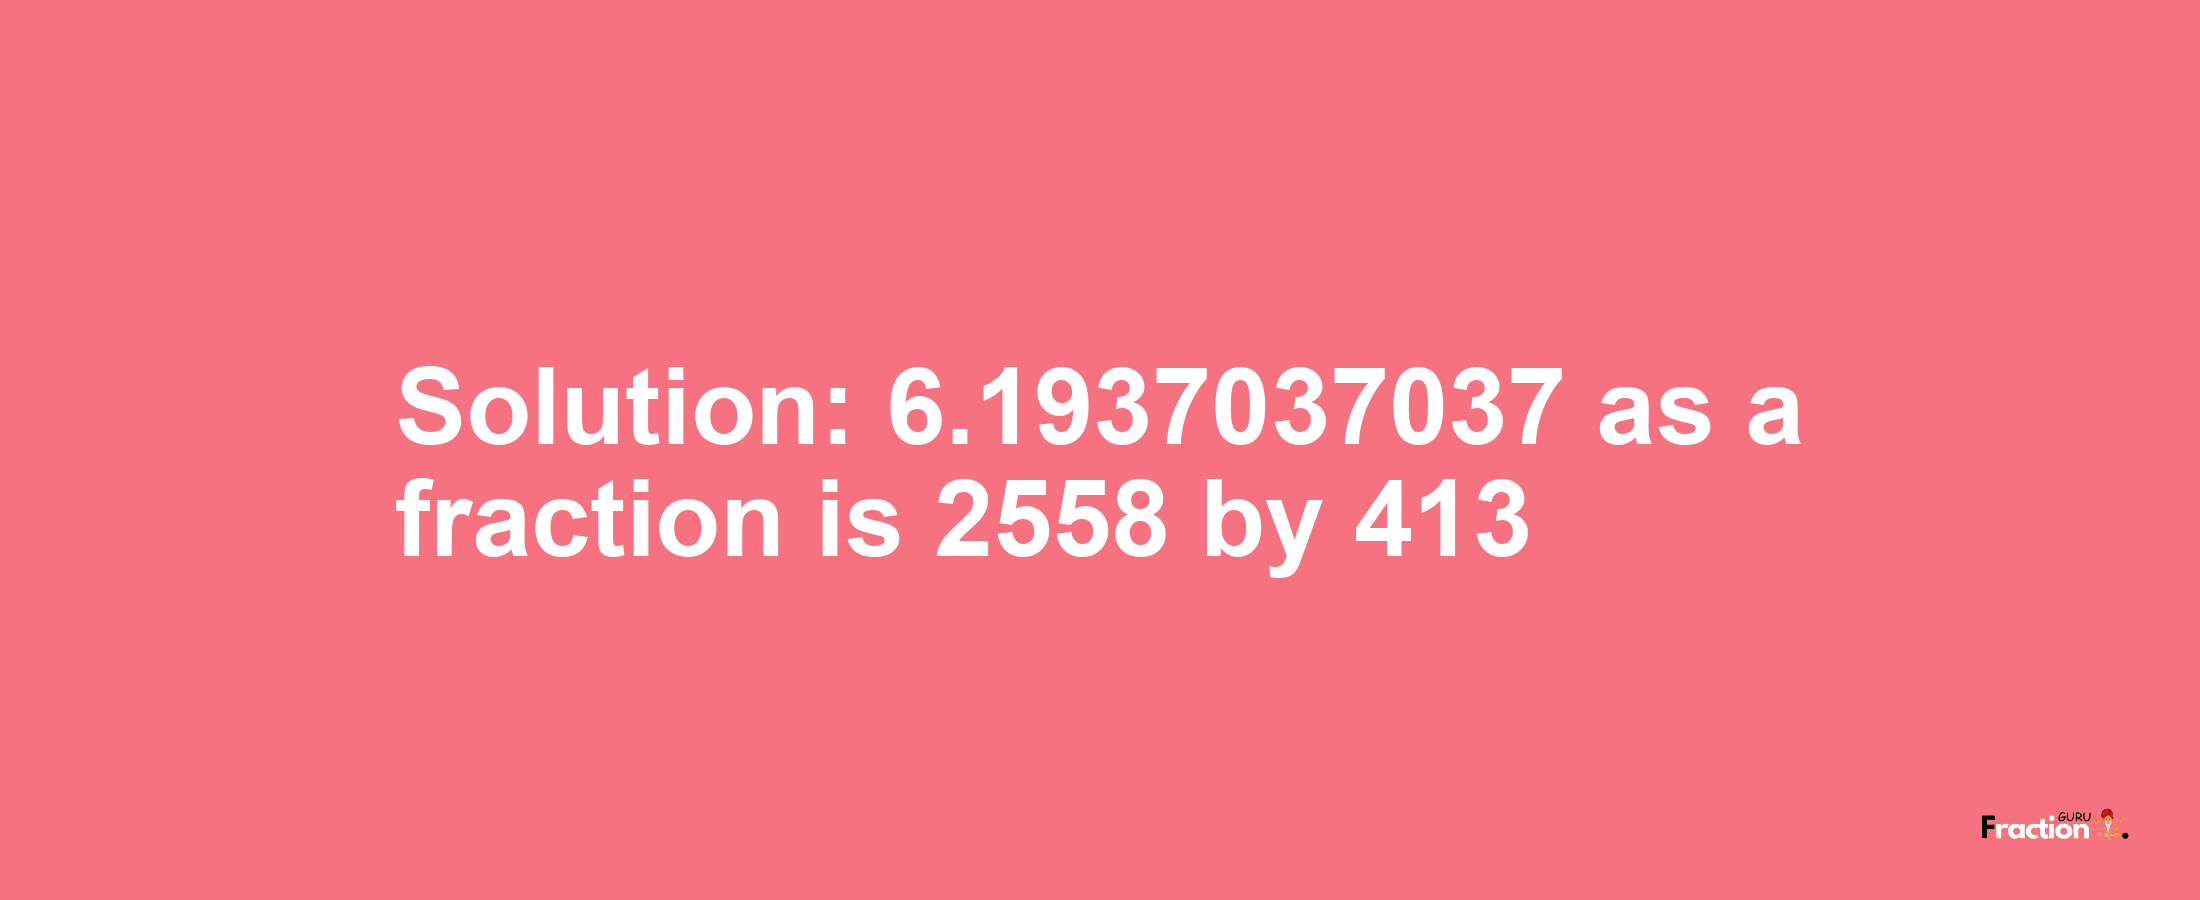 Solution:6.1937037037 as a fraction is 2558/413